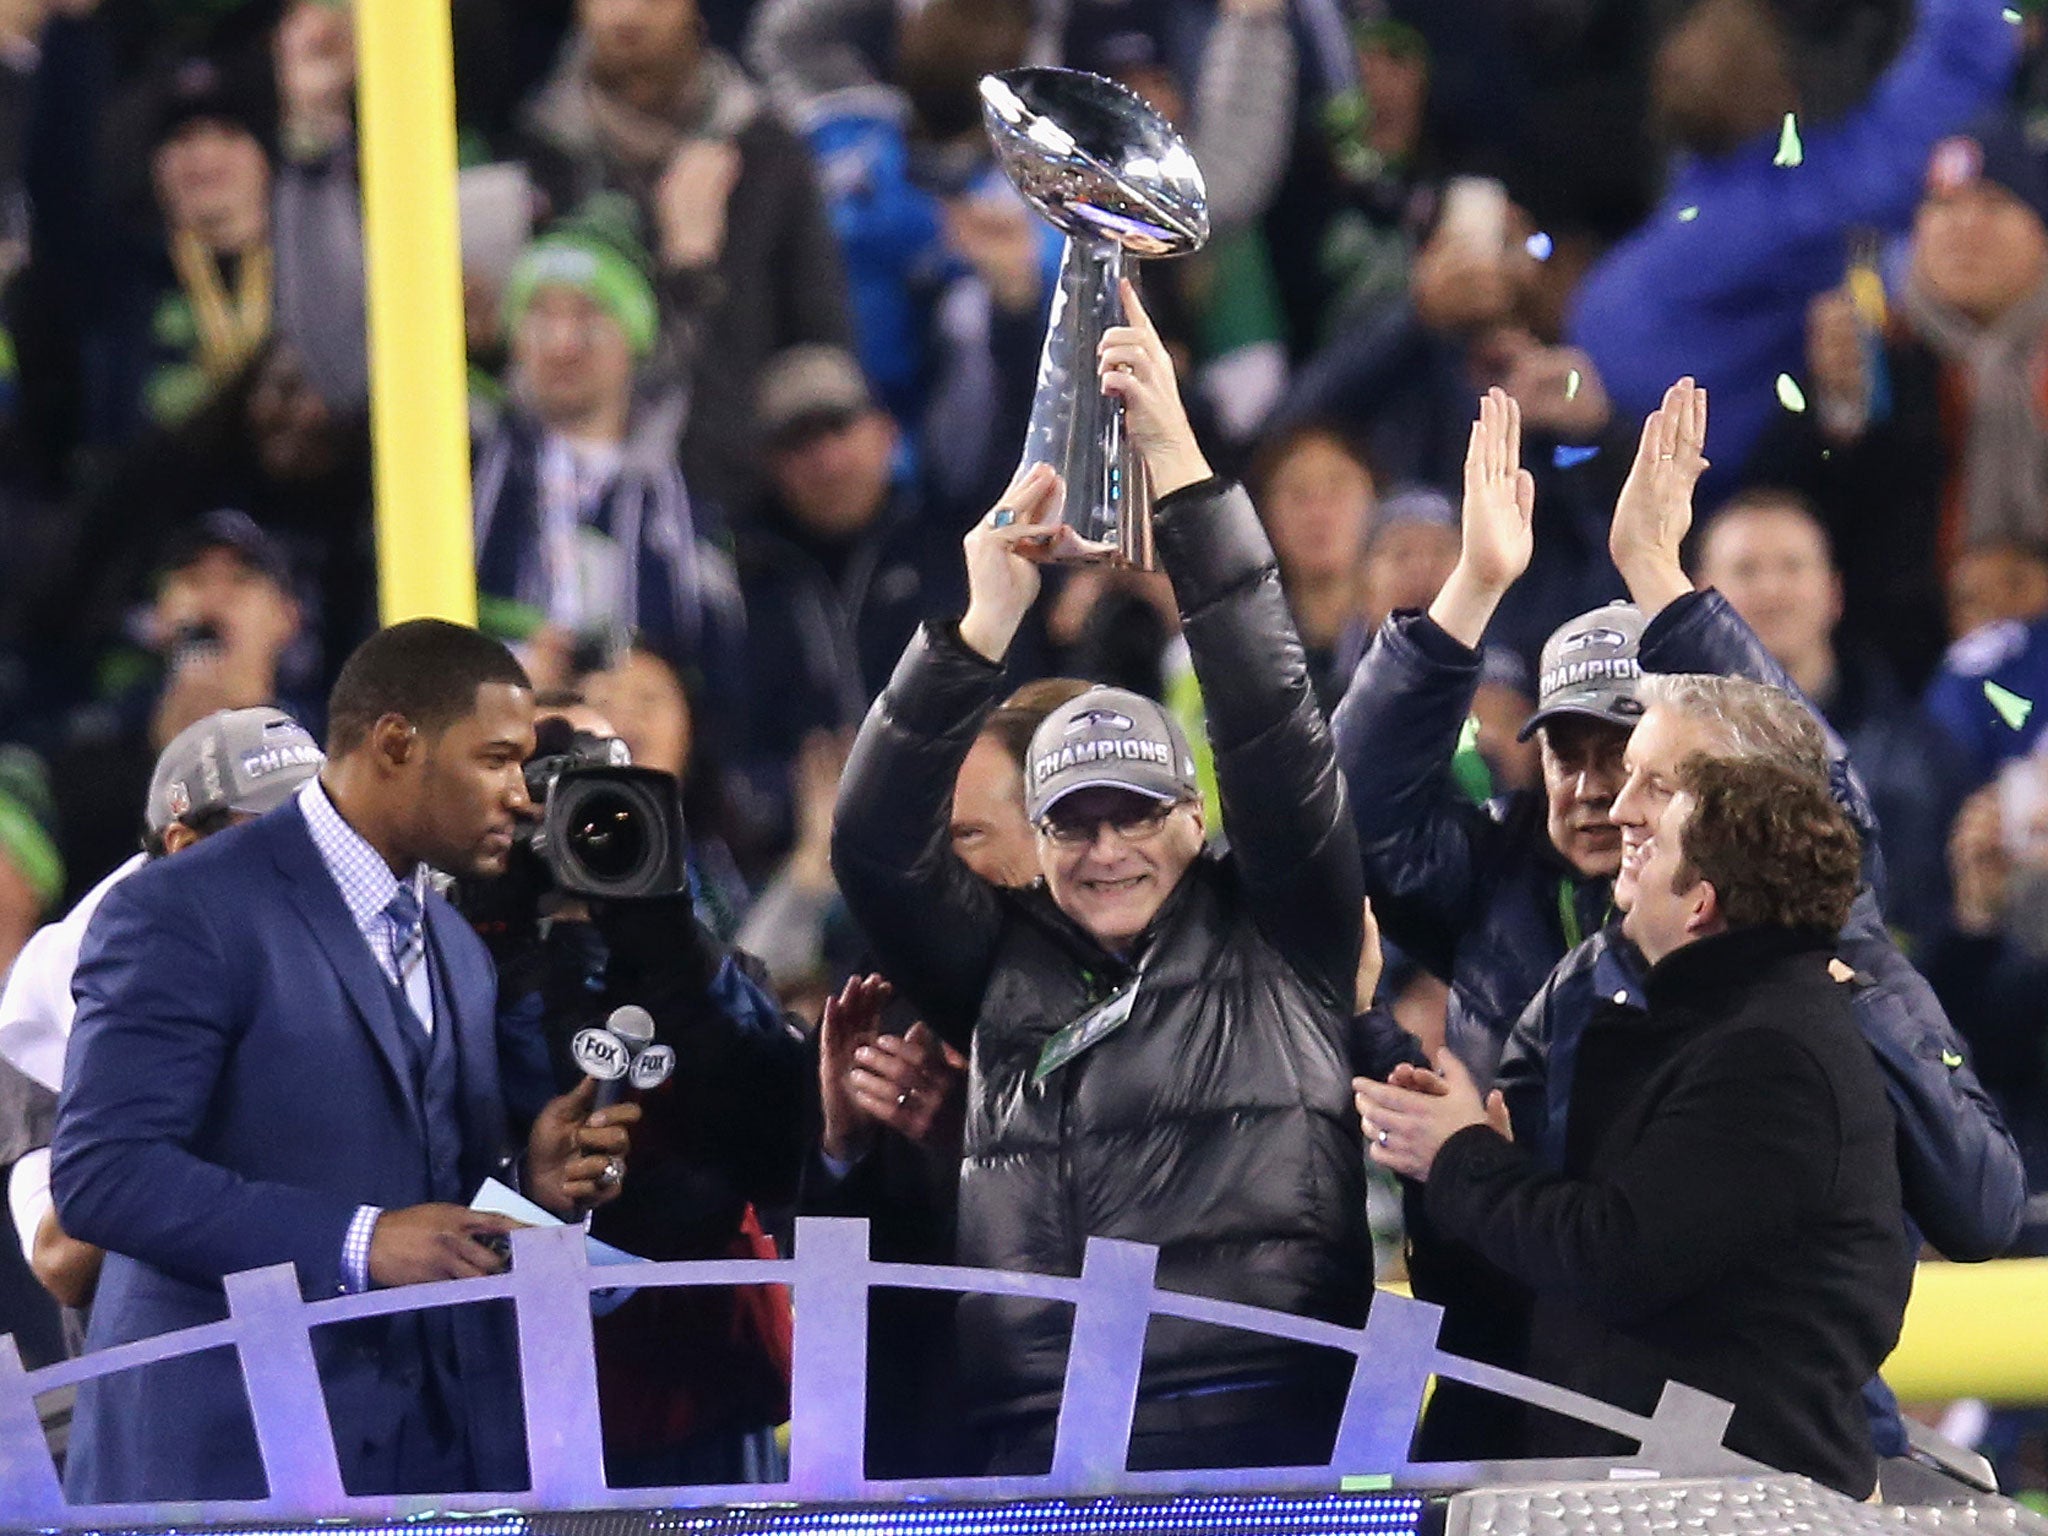 Who will lift the Vince Lombardi Trophy this season?